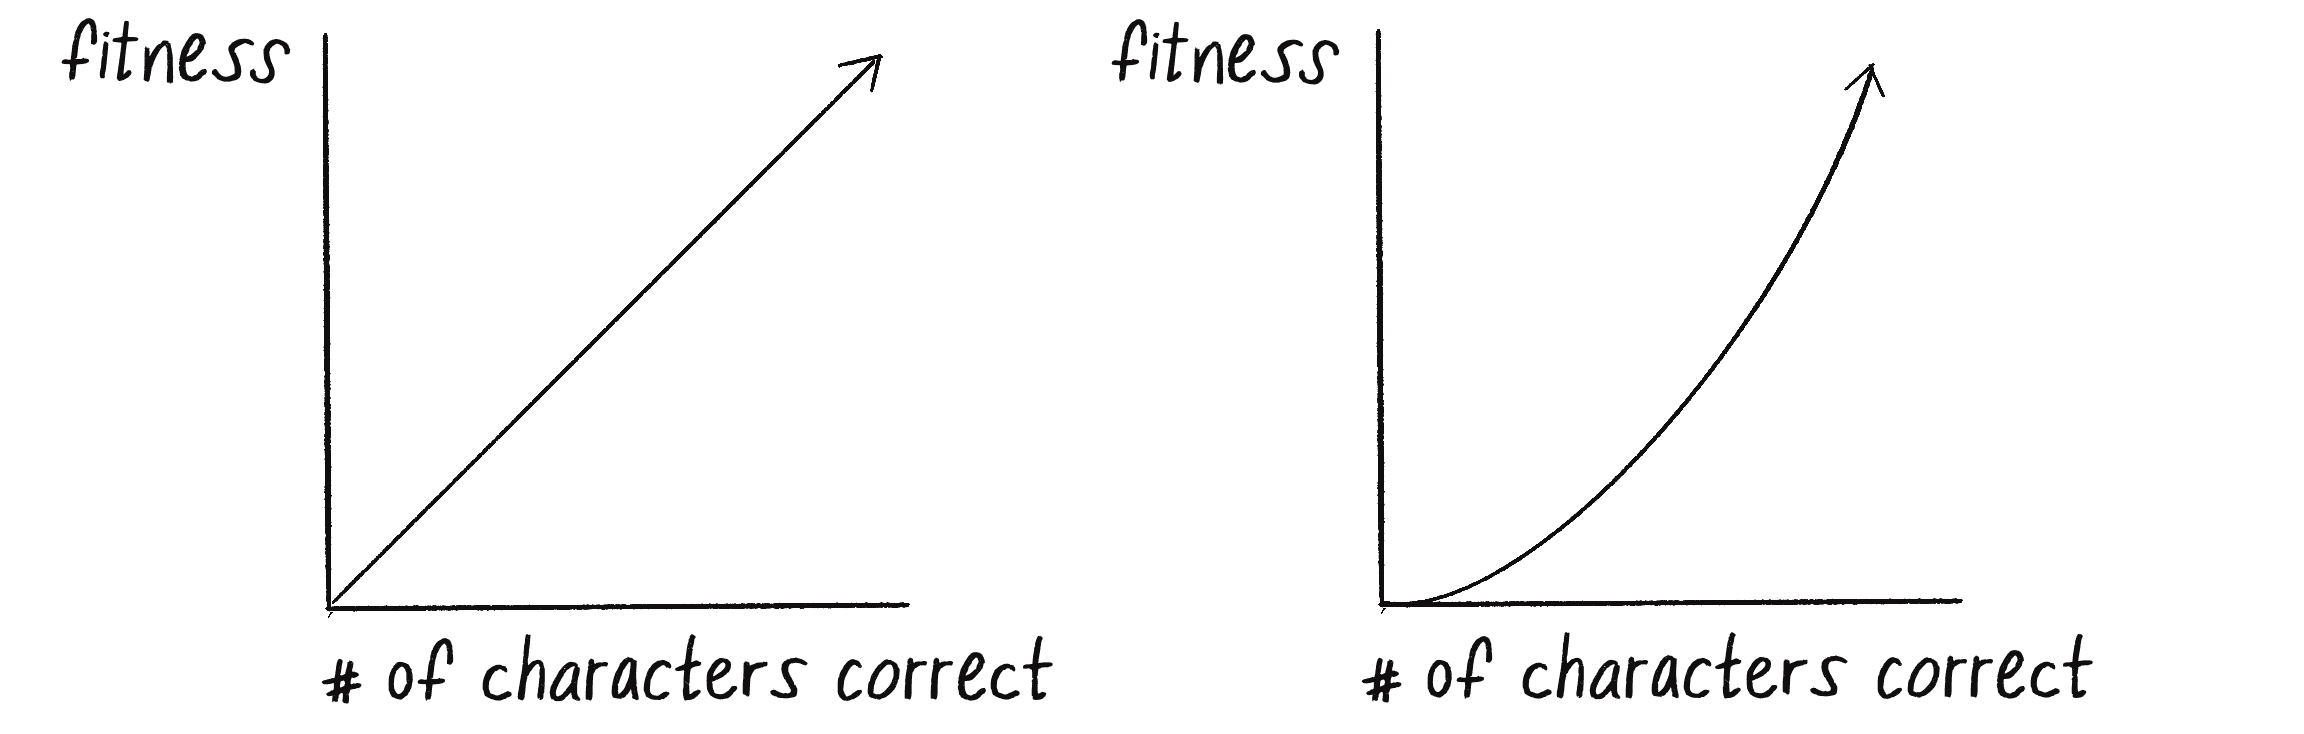 Figure 9.8: On the left, a fitness graph of y=x, on the right y = x^2